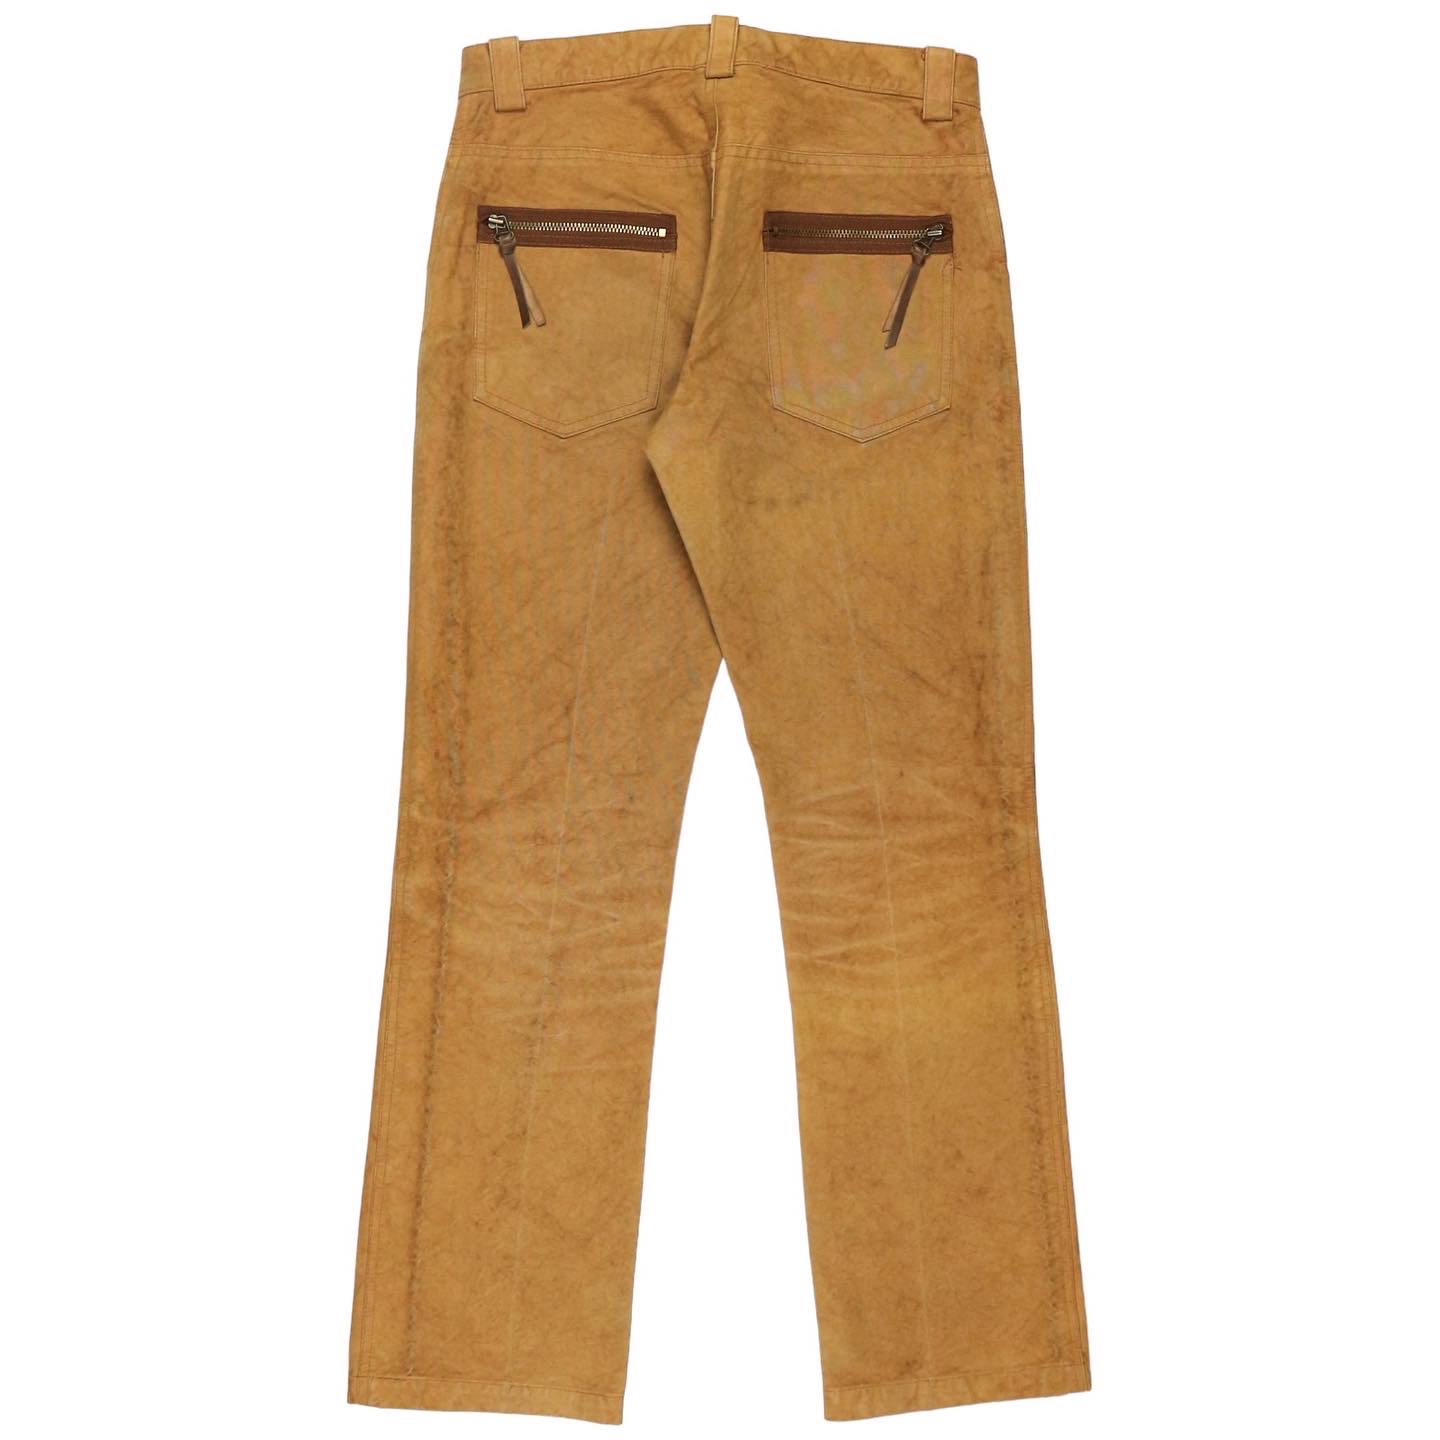 International Gallery by Beams Canvas Pants Size 30